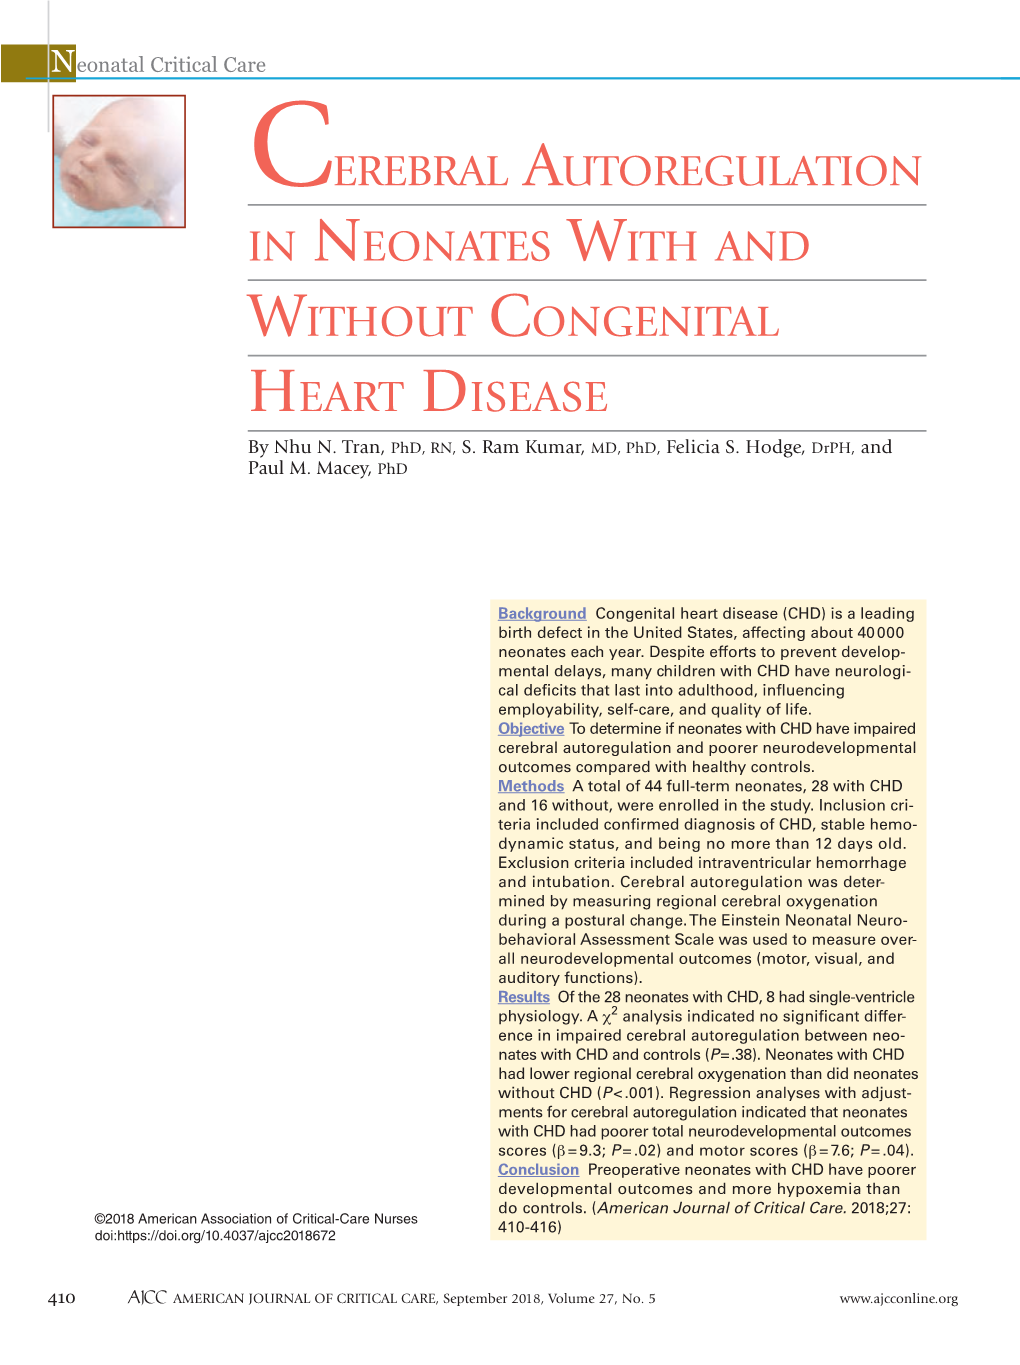 Cerebral Autoregulation in Neonates with and Without Congenital Heart Disease